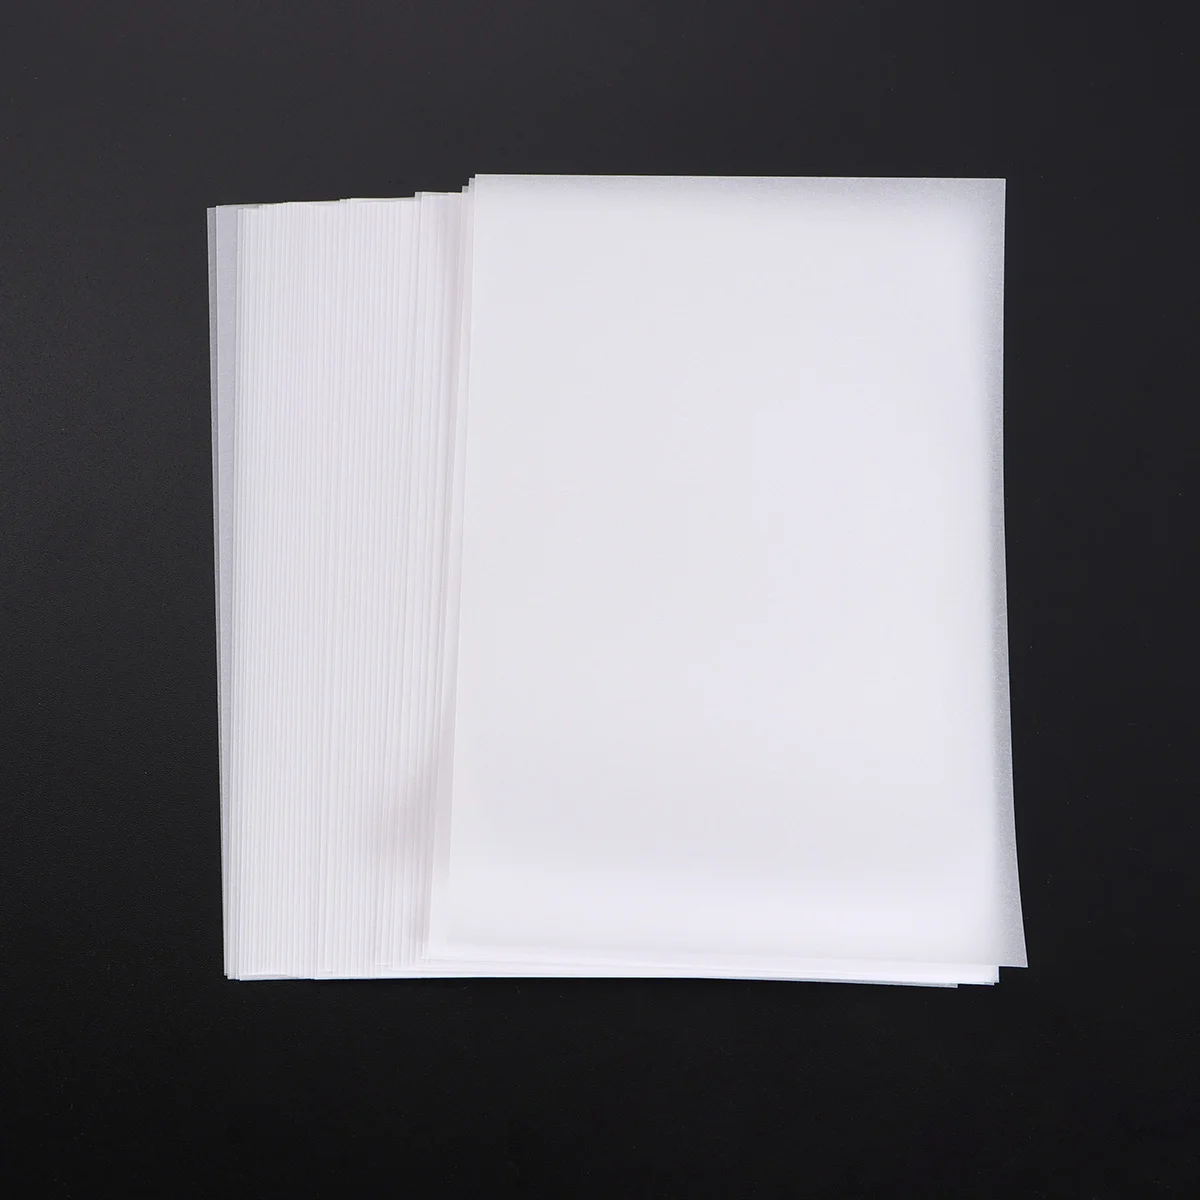 Heallily Kraft Paper Sheets 50Pcs Tracing Paper A4 Size White Transfer Tracing Copy Paper Sketching Sulphite Art Paper